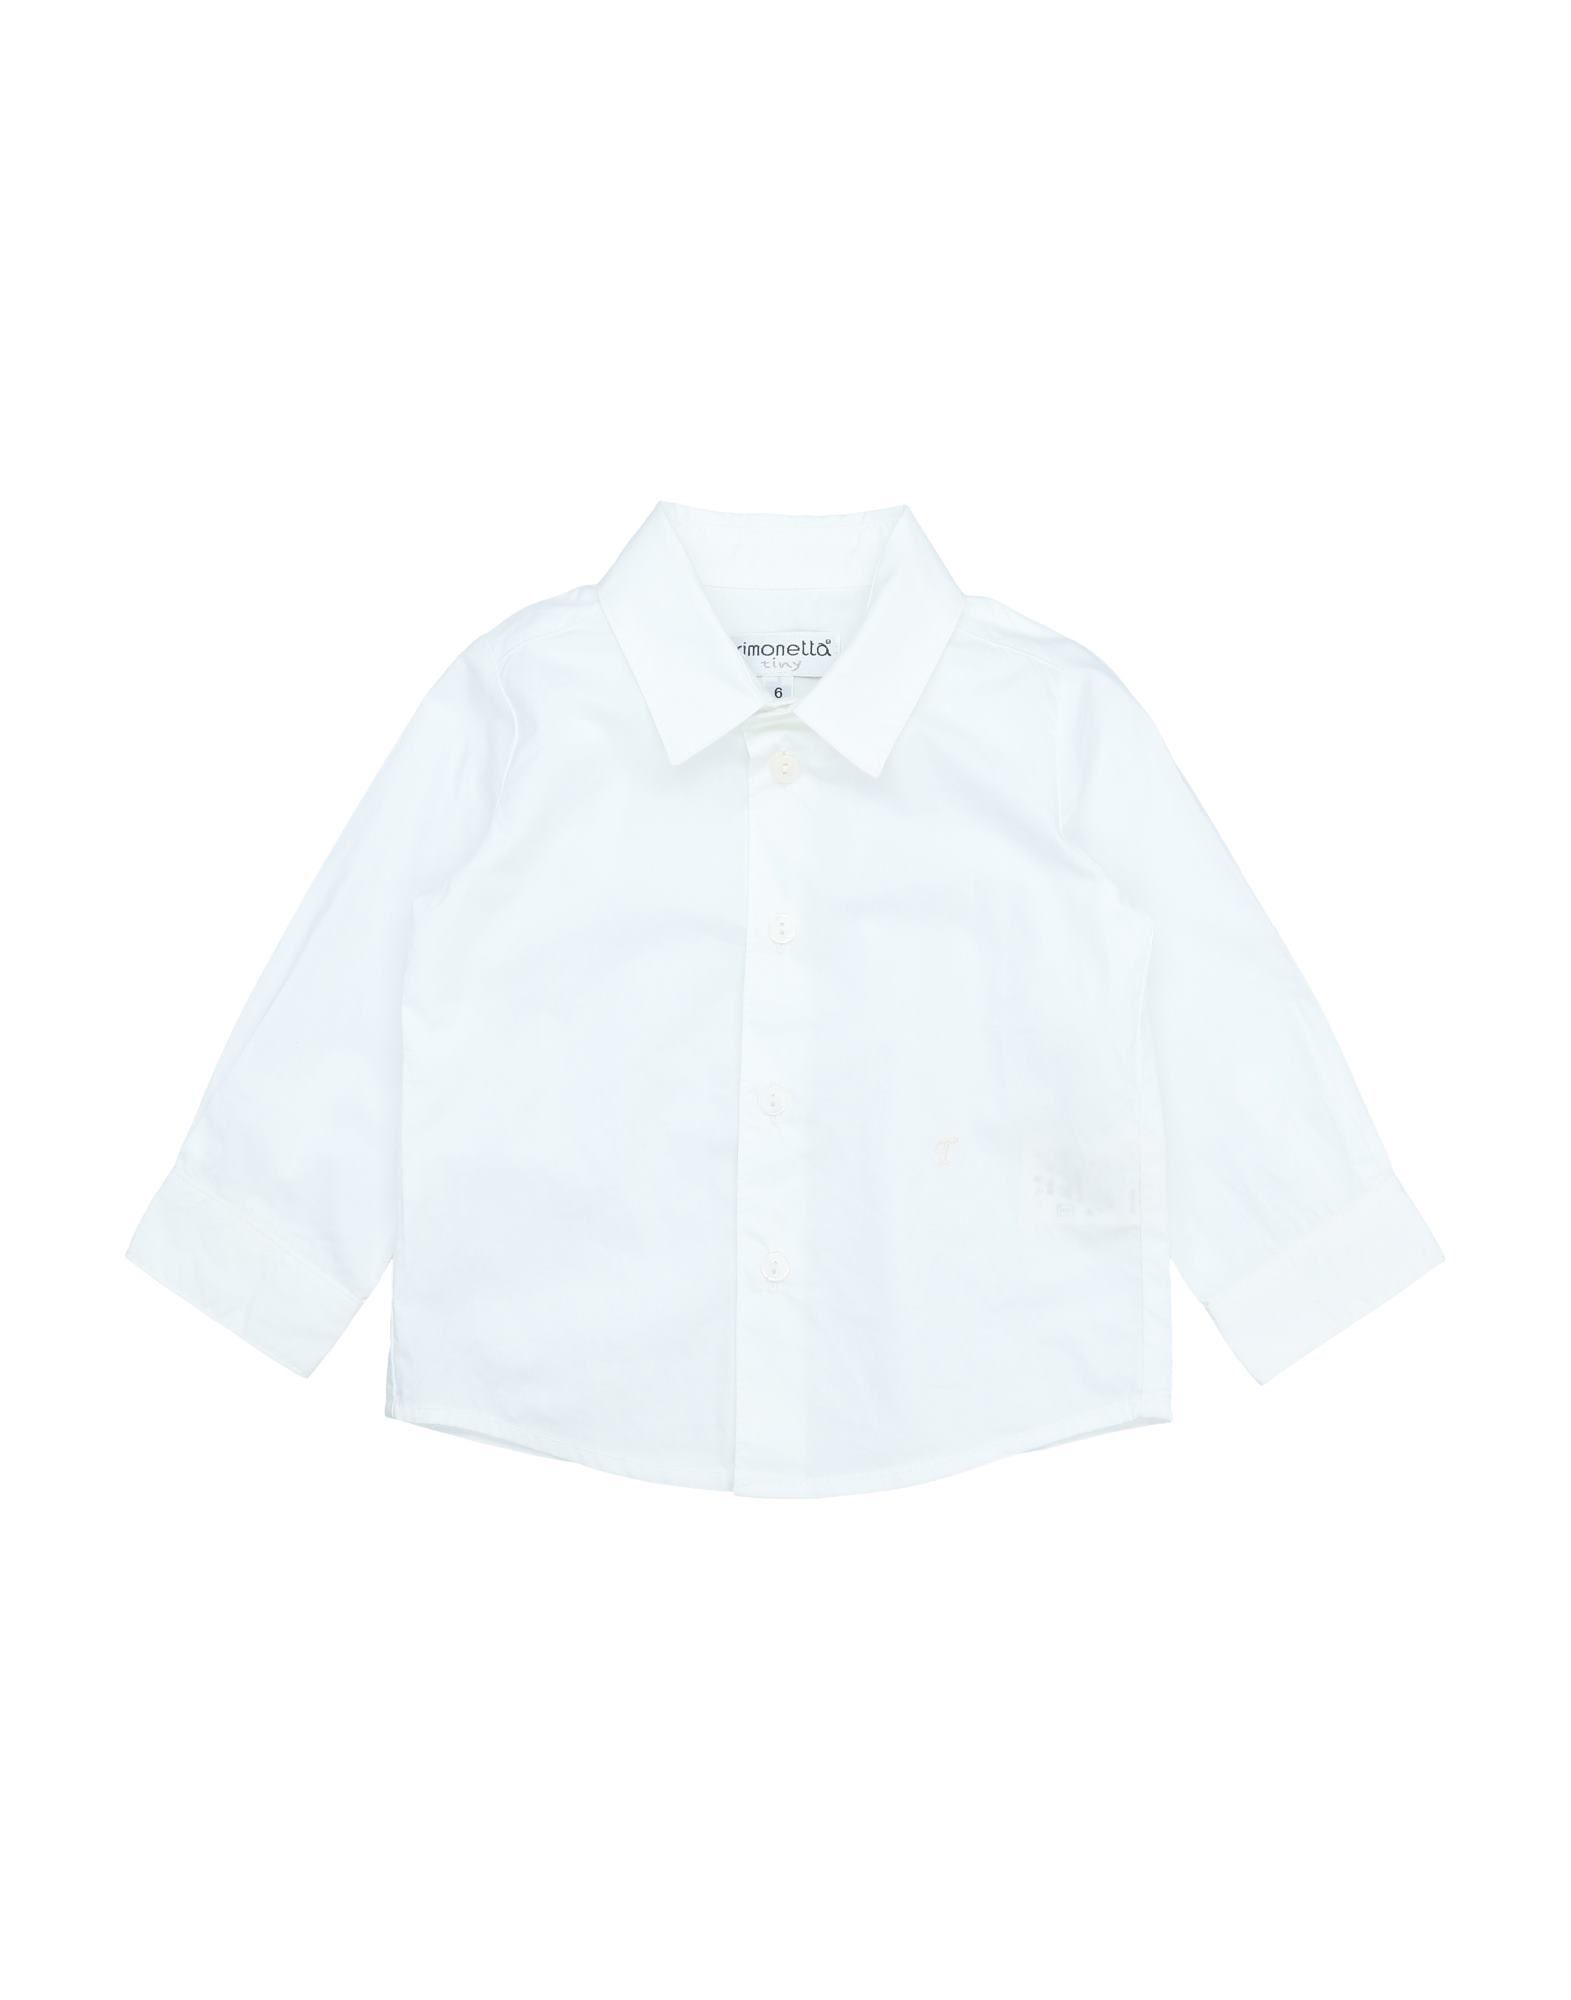 wash at 30° c, iron at 110° c max, do not tumble dry, do not bleach, dry cleanable, plain weave, logo, basic solid colour, front closure, button closing, long sleeves, buttoned cuffs, classic neckline, no pockets